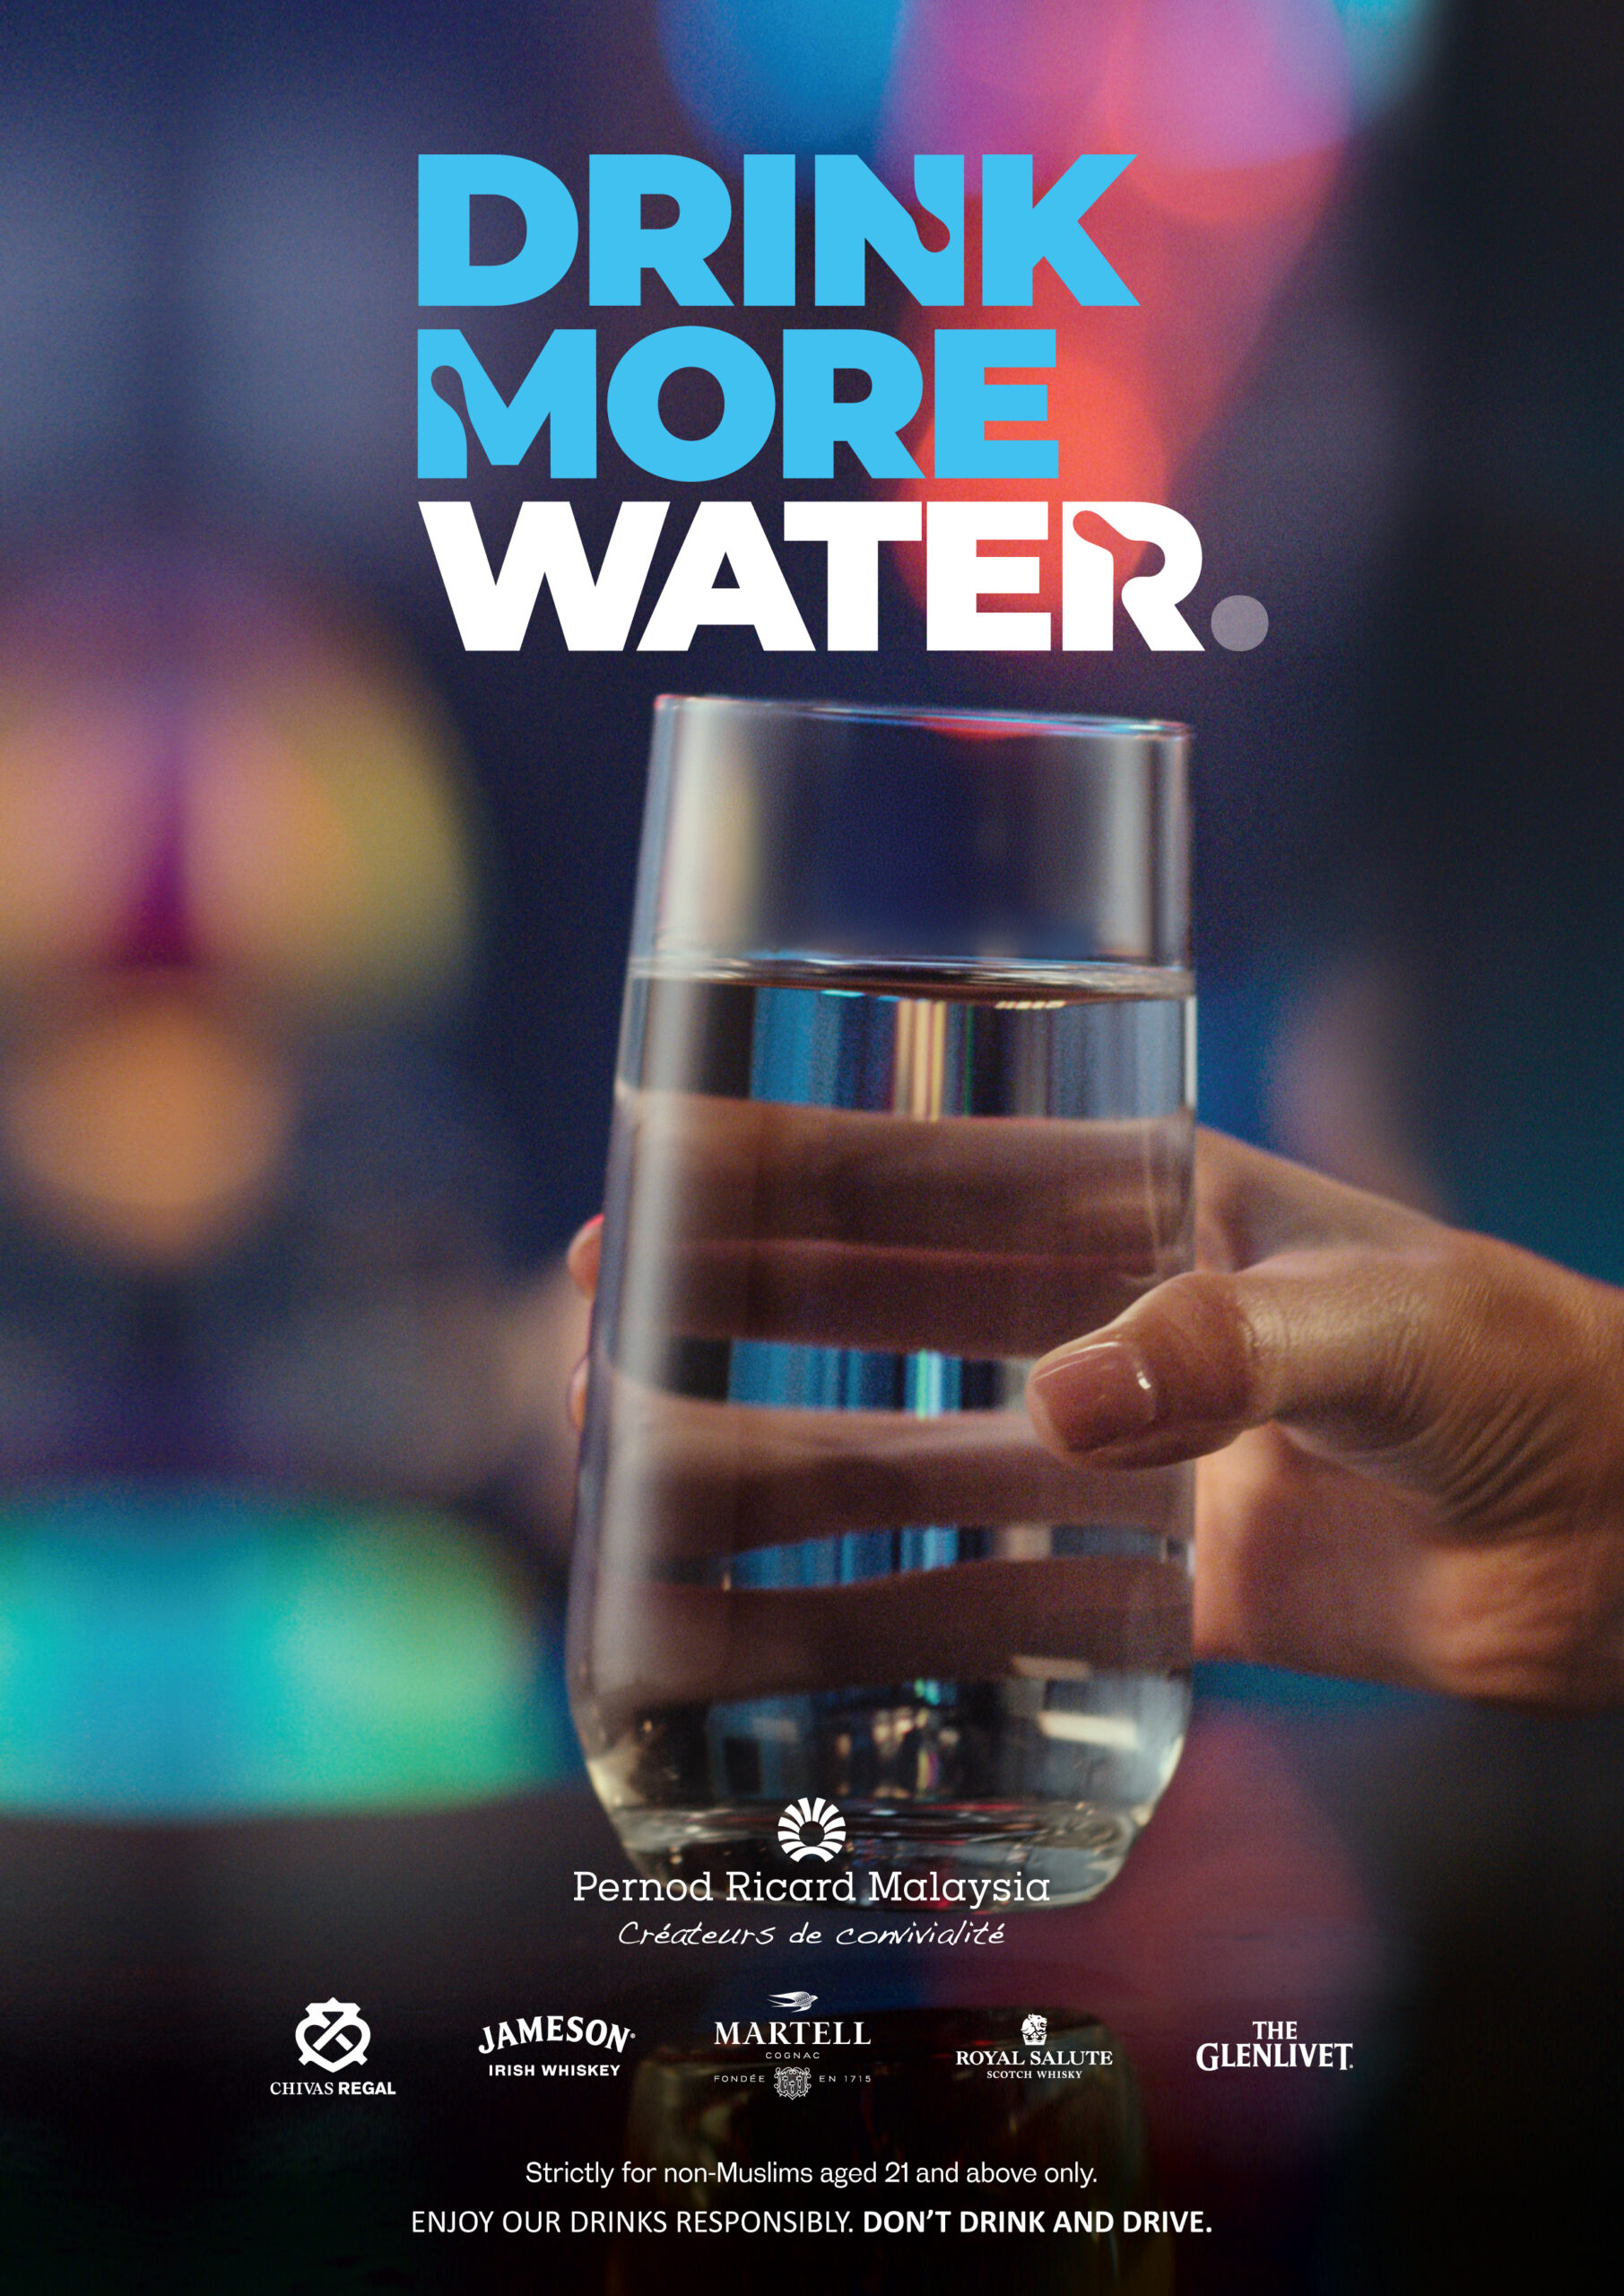 Pernod ricard launches ‘drink more water’ campaign in malaysia | weirdkaya